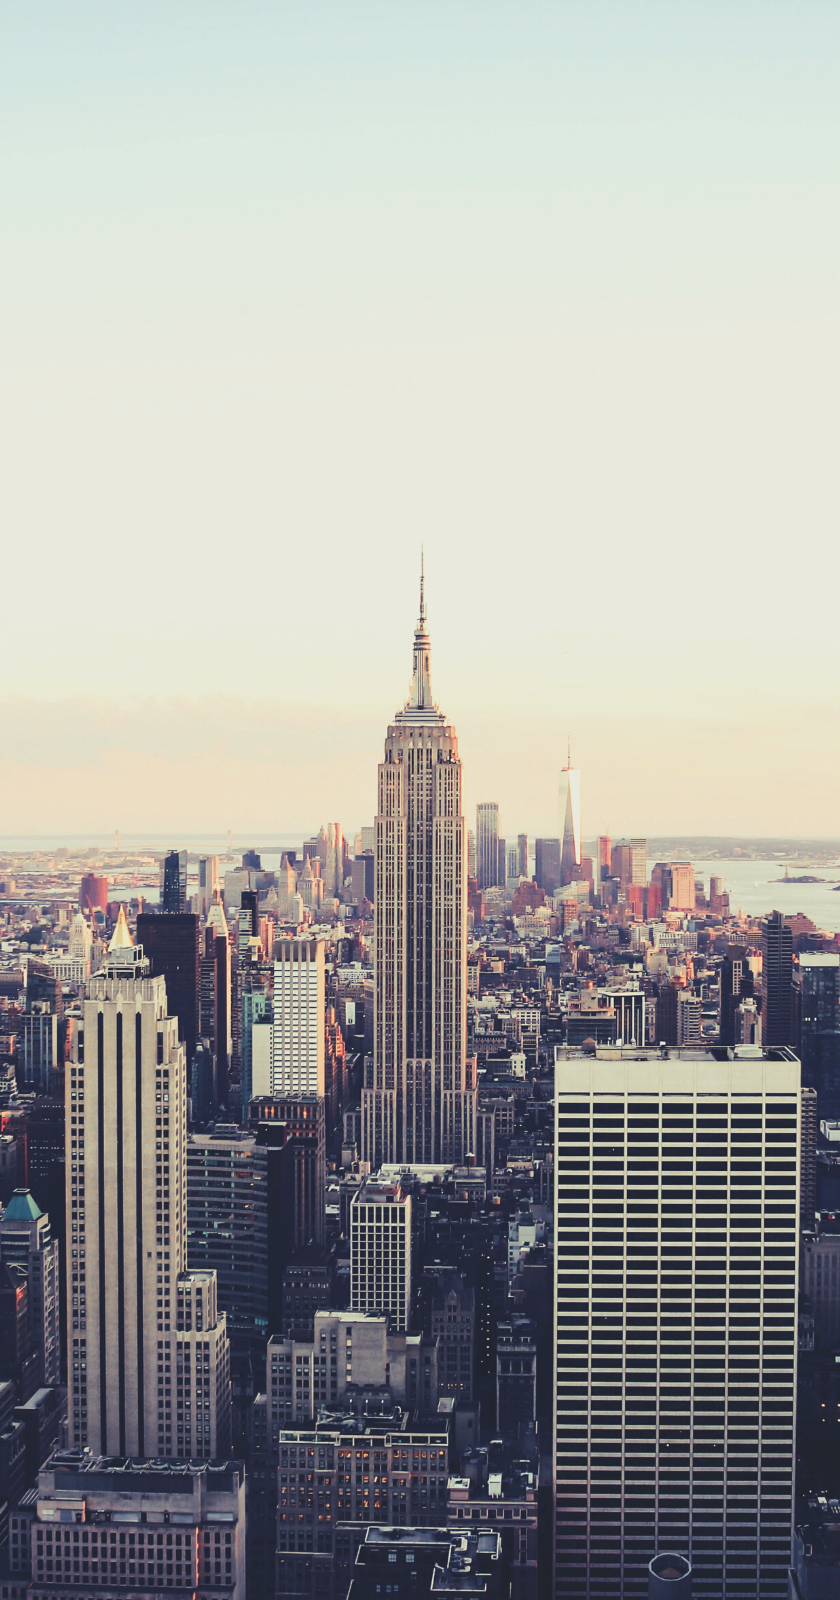 The best New York City wallpaper to download free for iPhone. City wallpaper, New york picture, Central park view